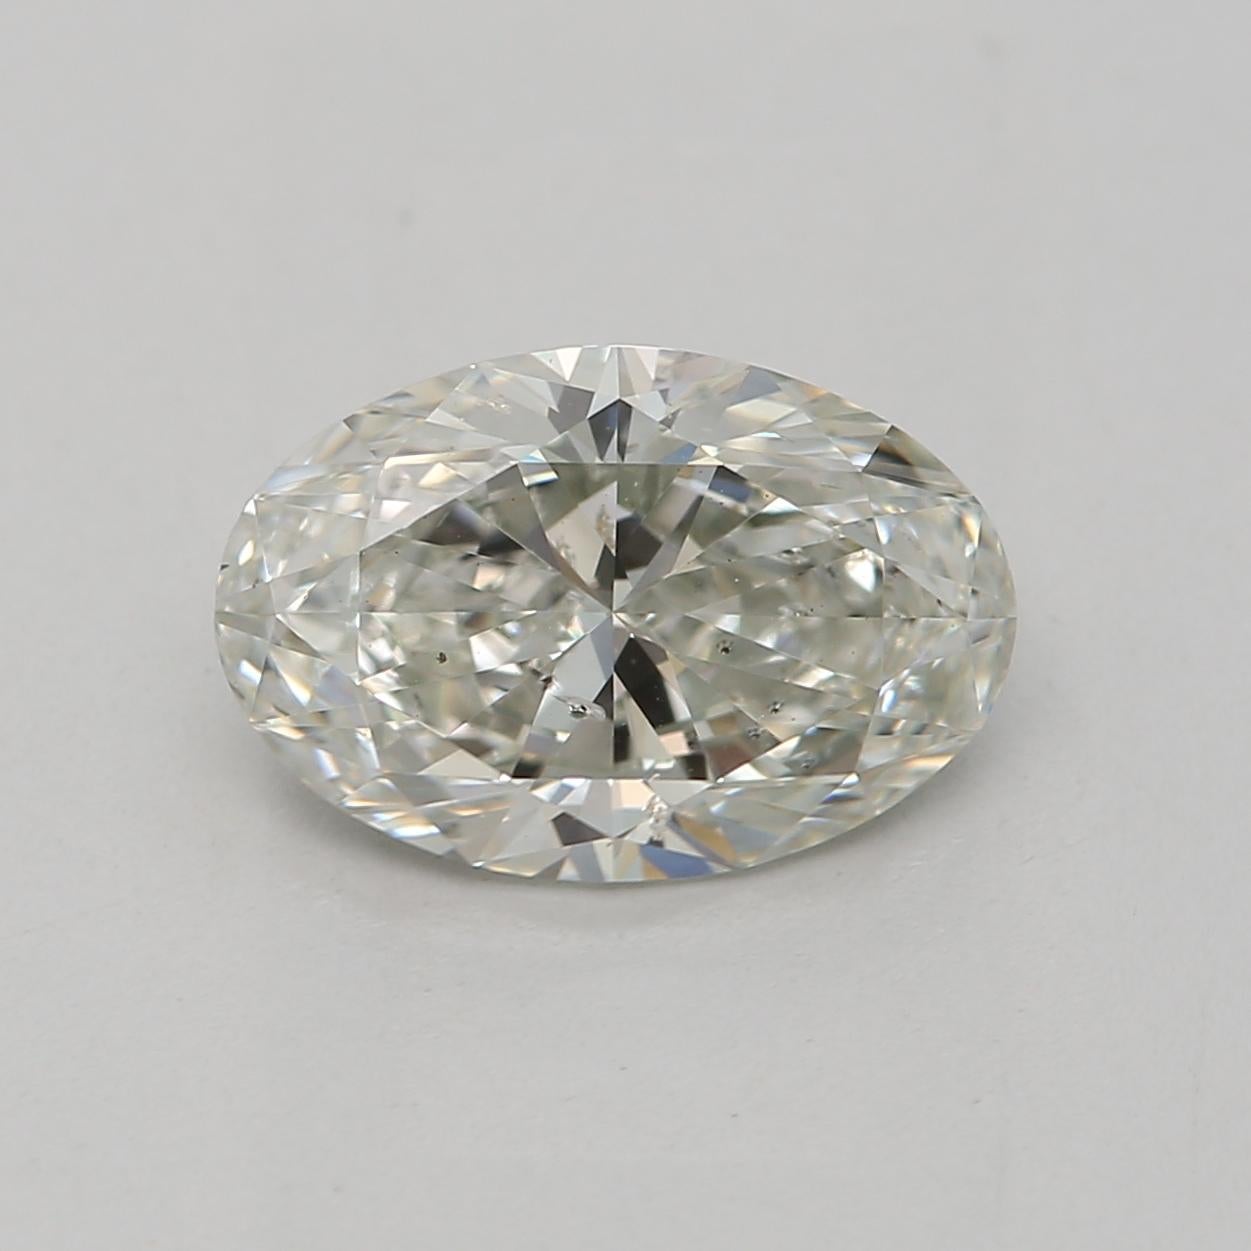 ***100% NATURAL FANCY COLOUR DIAMOND***

✪ Diamond Details ✪

➛ Shape: Oval
➛ Colour Grade: Light Yellow-Green
➛ Carat: 1.01
➛ Clarity: SI2
➛ GIA Certified 

^FEATURES OF THE DIAMOND^

This 1.01 carat diamond refers to the weight of the diamond,